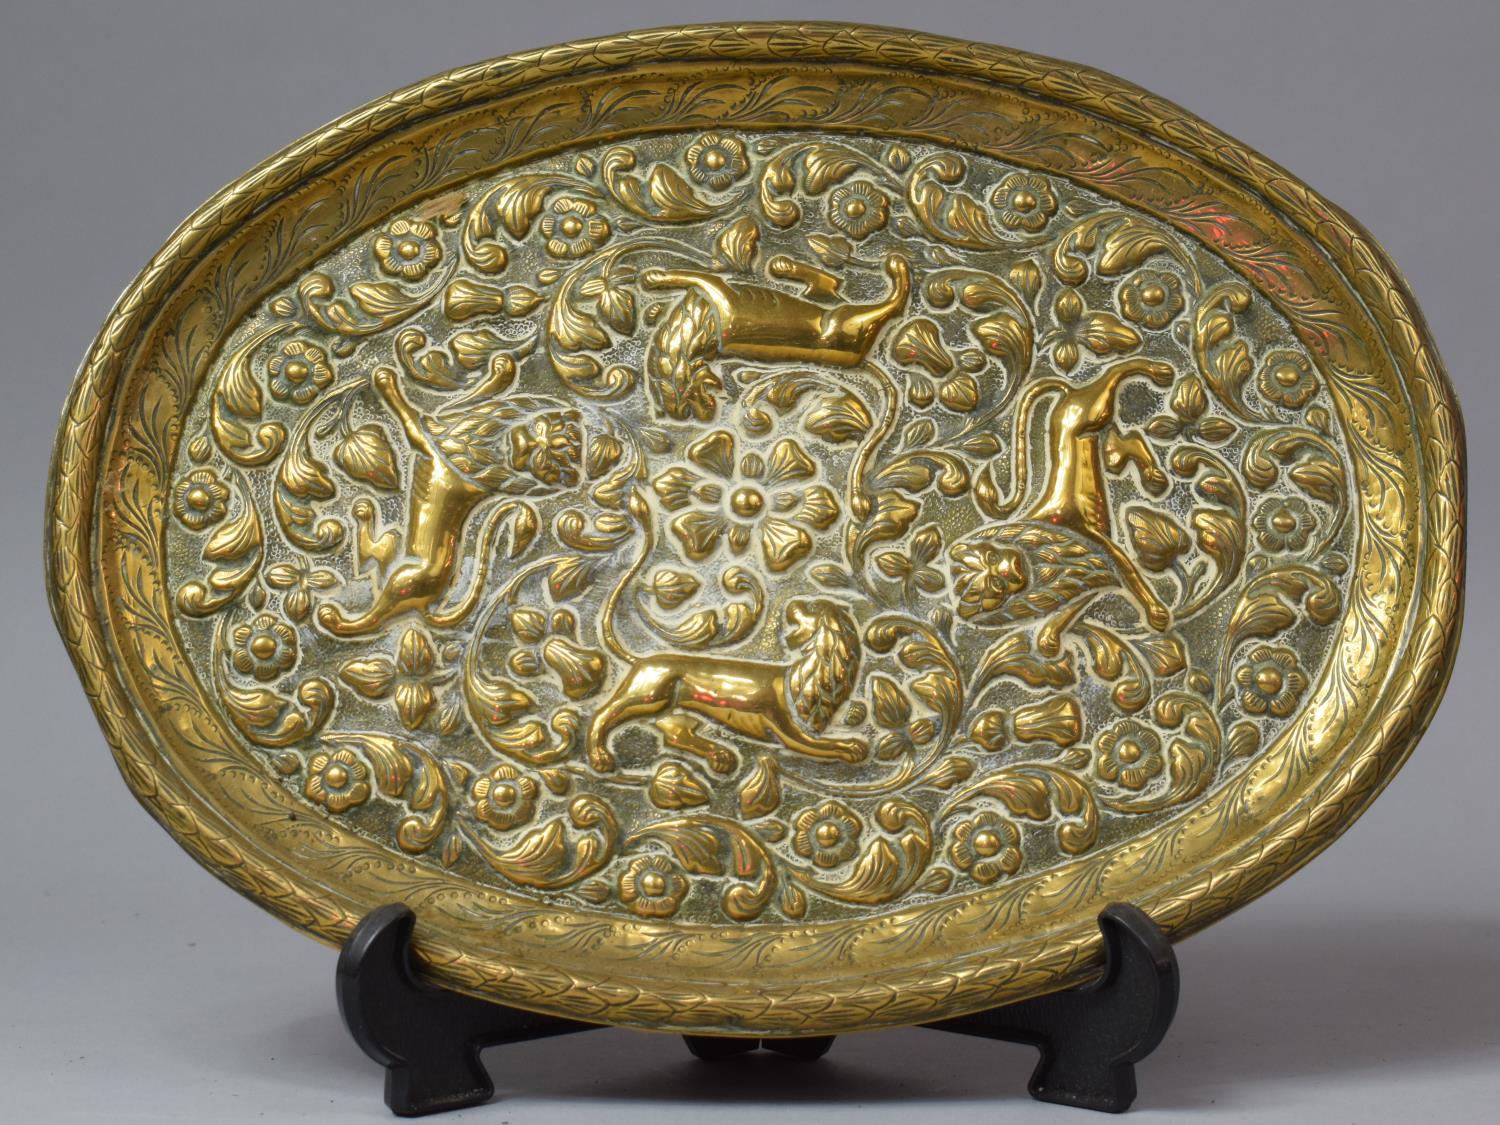 An Indian Brass Oval Wall Hanging Decorated in Relief with Four Lions, 28cm Long